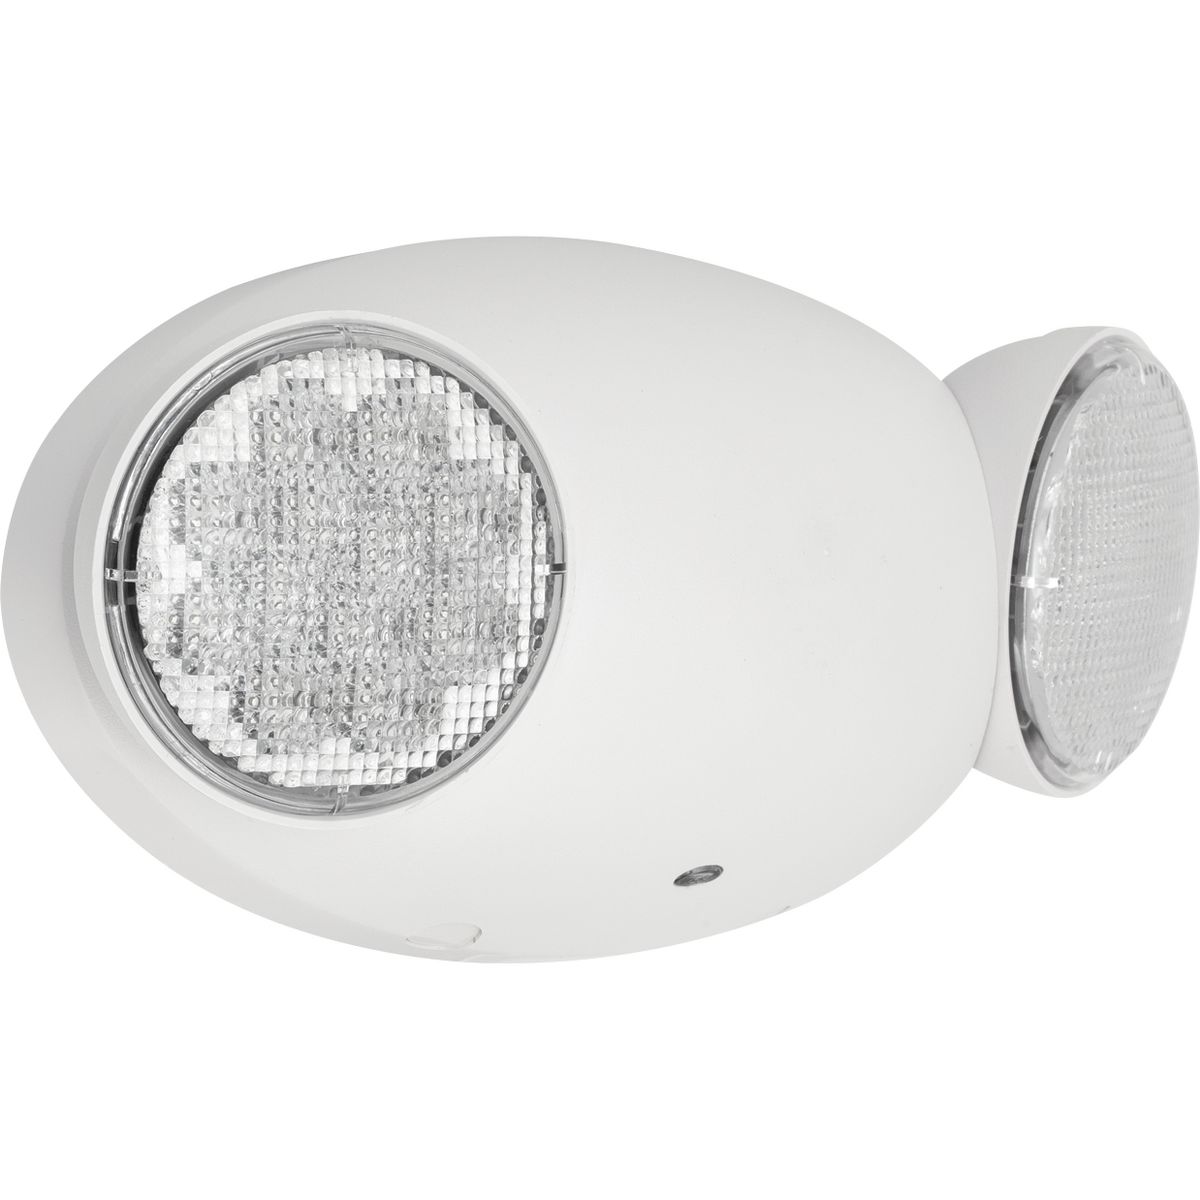 The PE2EU Series offers quality and value with a compact and attractive LED based emergency light. The white housing and lamp-heads are fully adjustable and glare-free. Snap together design for quick and easy installation with option of a wall or ceiling mount. The PE2EU Series can be applied in stairwells, hallways, offices and other commercial applications.